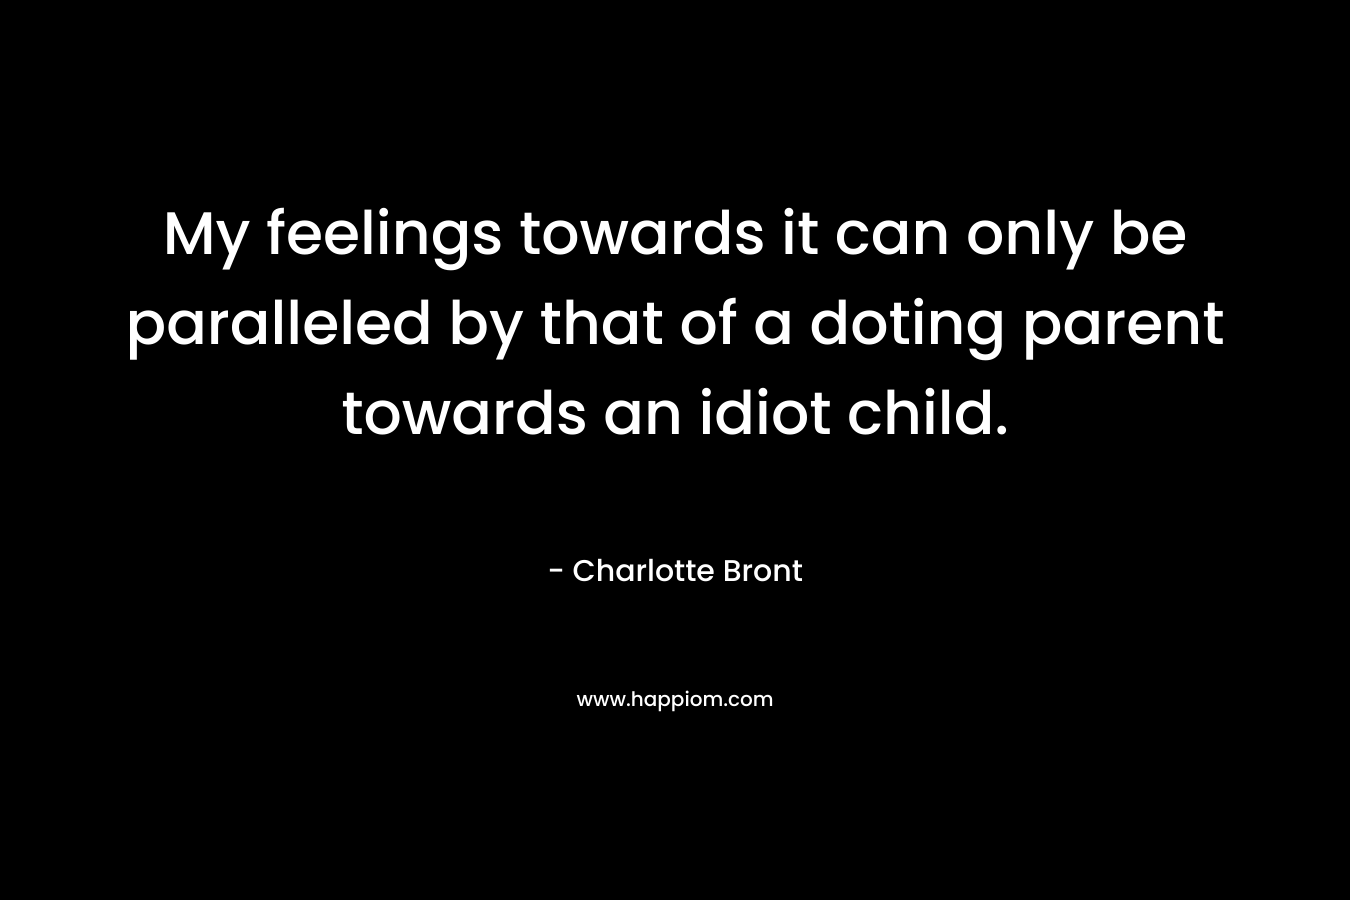 My feelings towards it can only be paralleled by that of a doting parent towards an idiot child. – Charlotte Bront